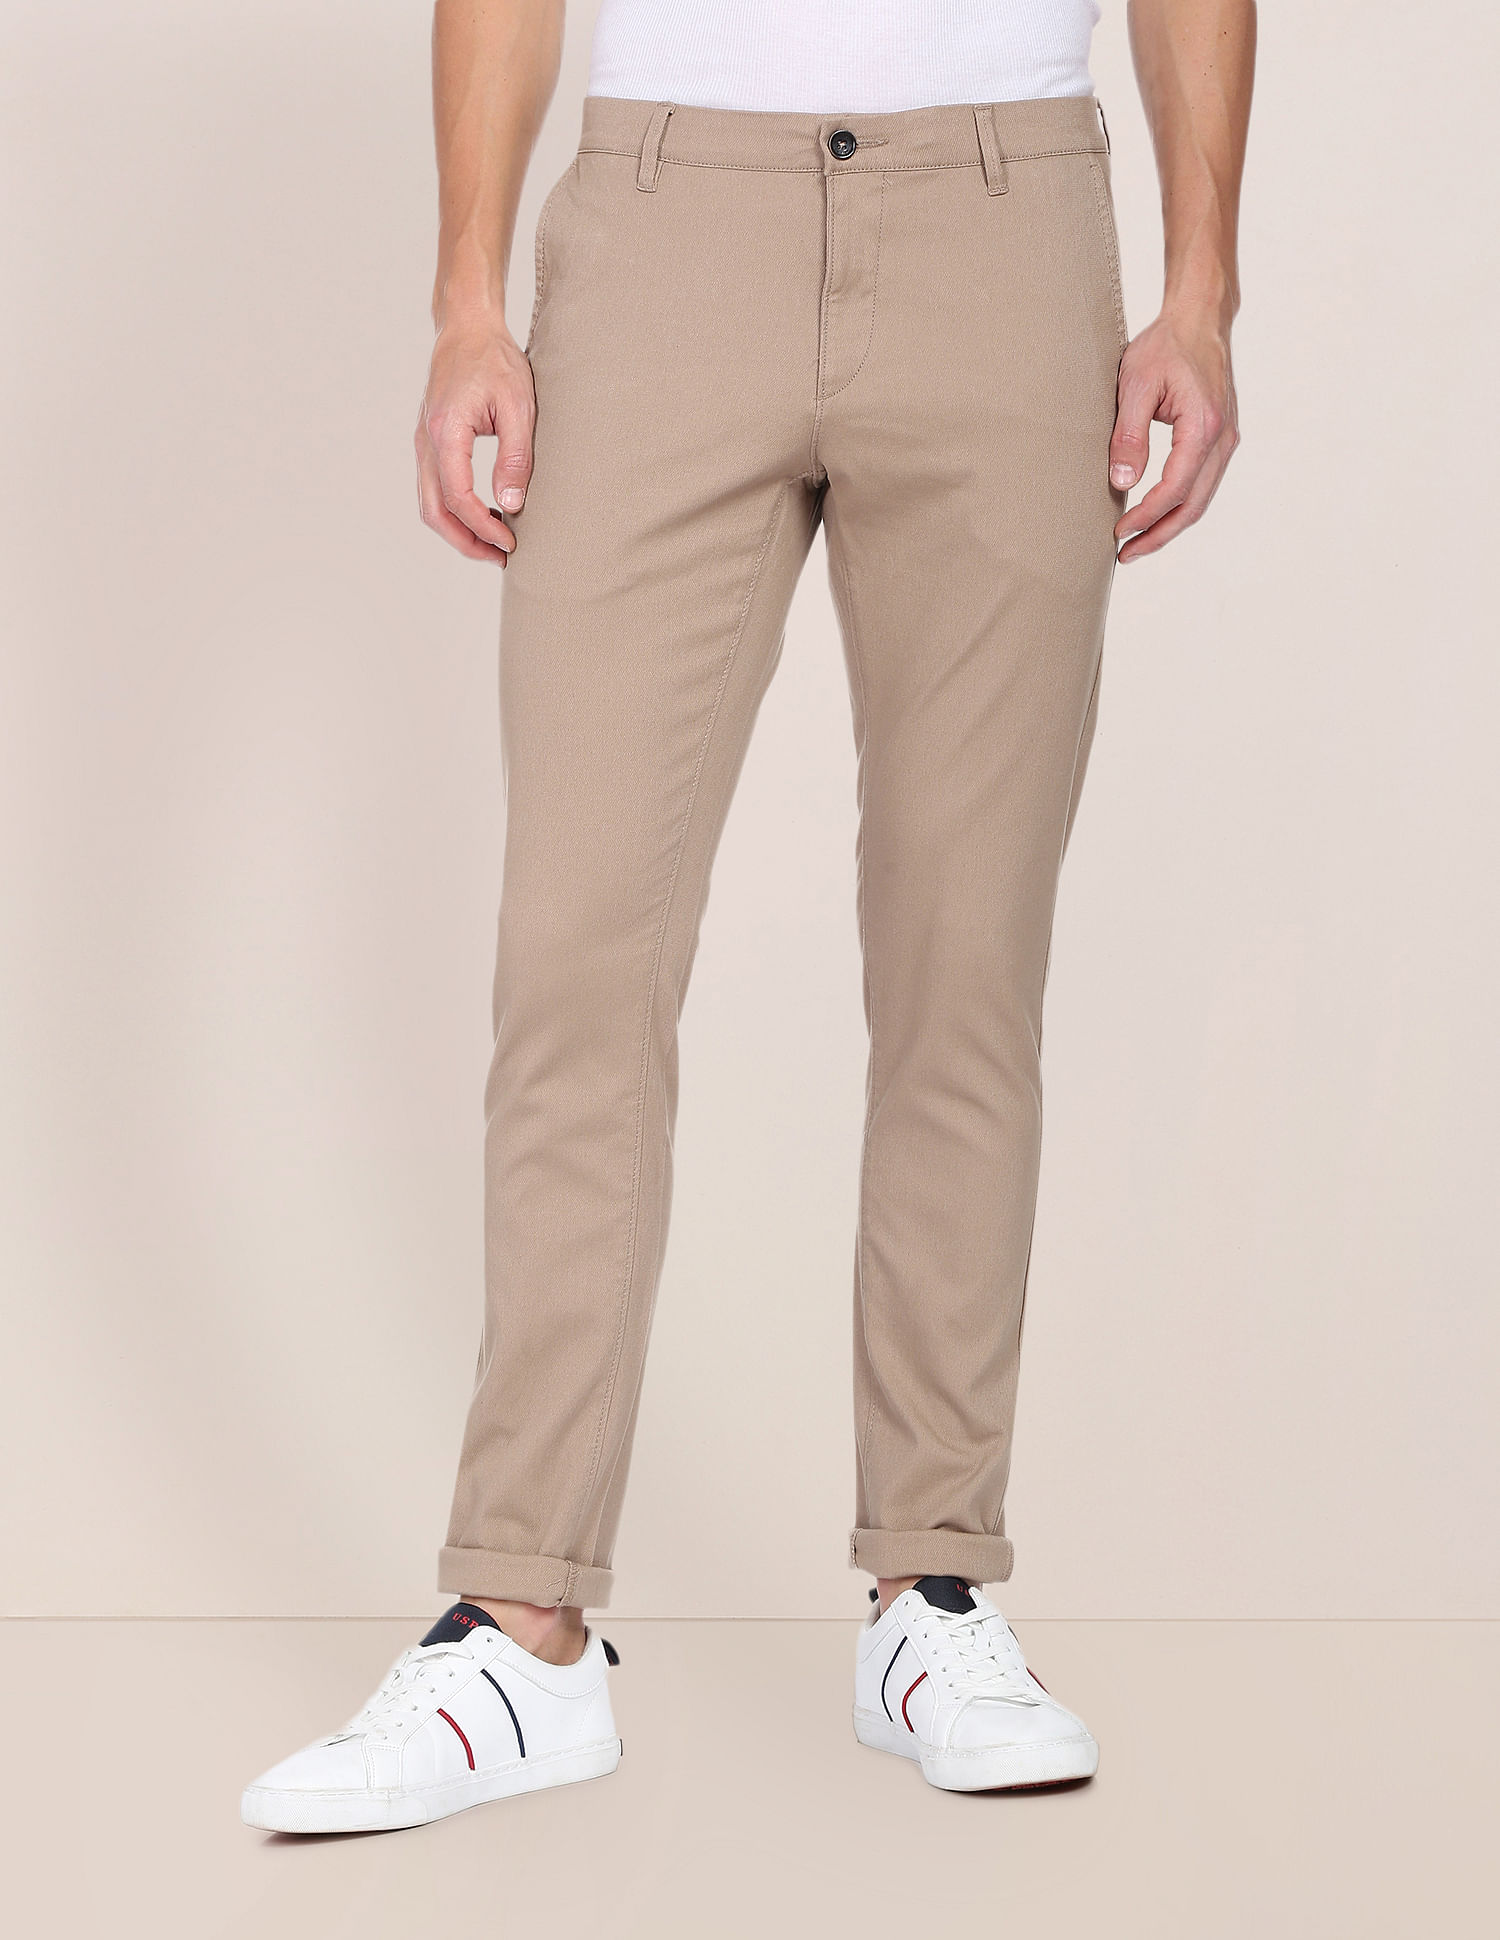 uspoloassn mens casual trousers at Best Price  989 with many options  Only in India at MartAvenuecom  Mart Avenue  MartAvenue